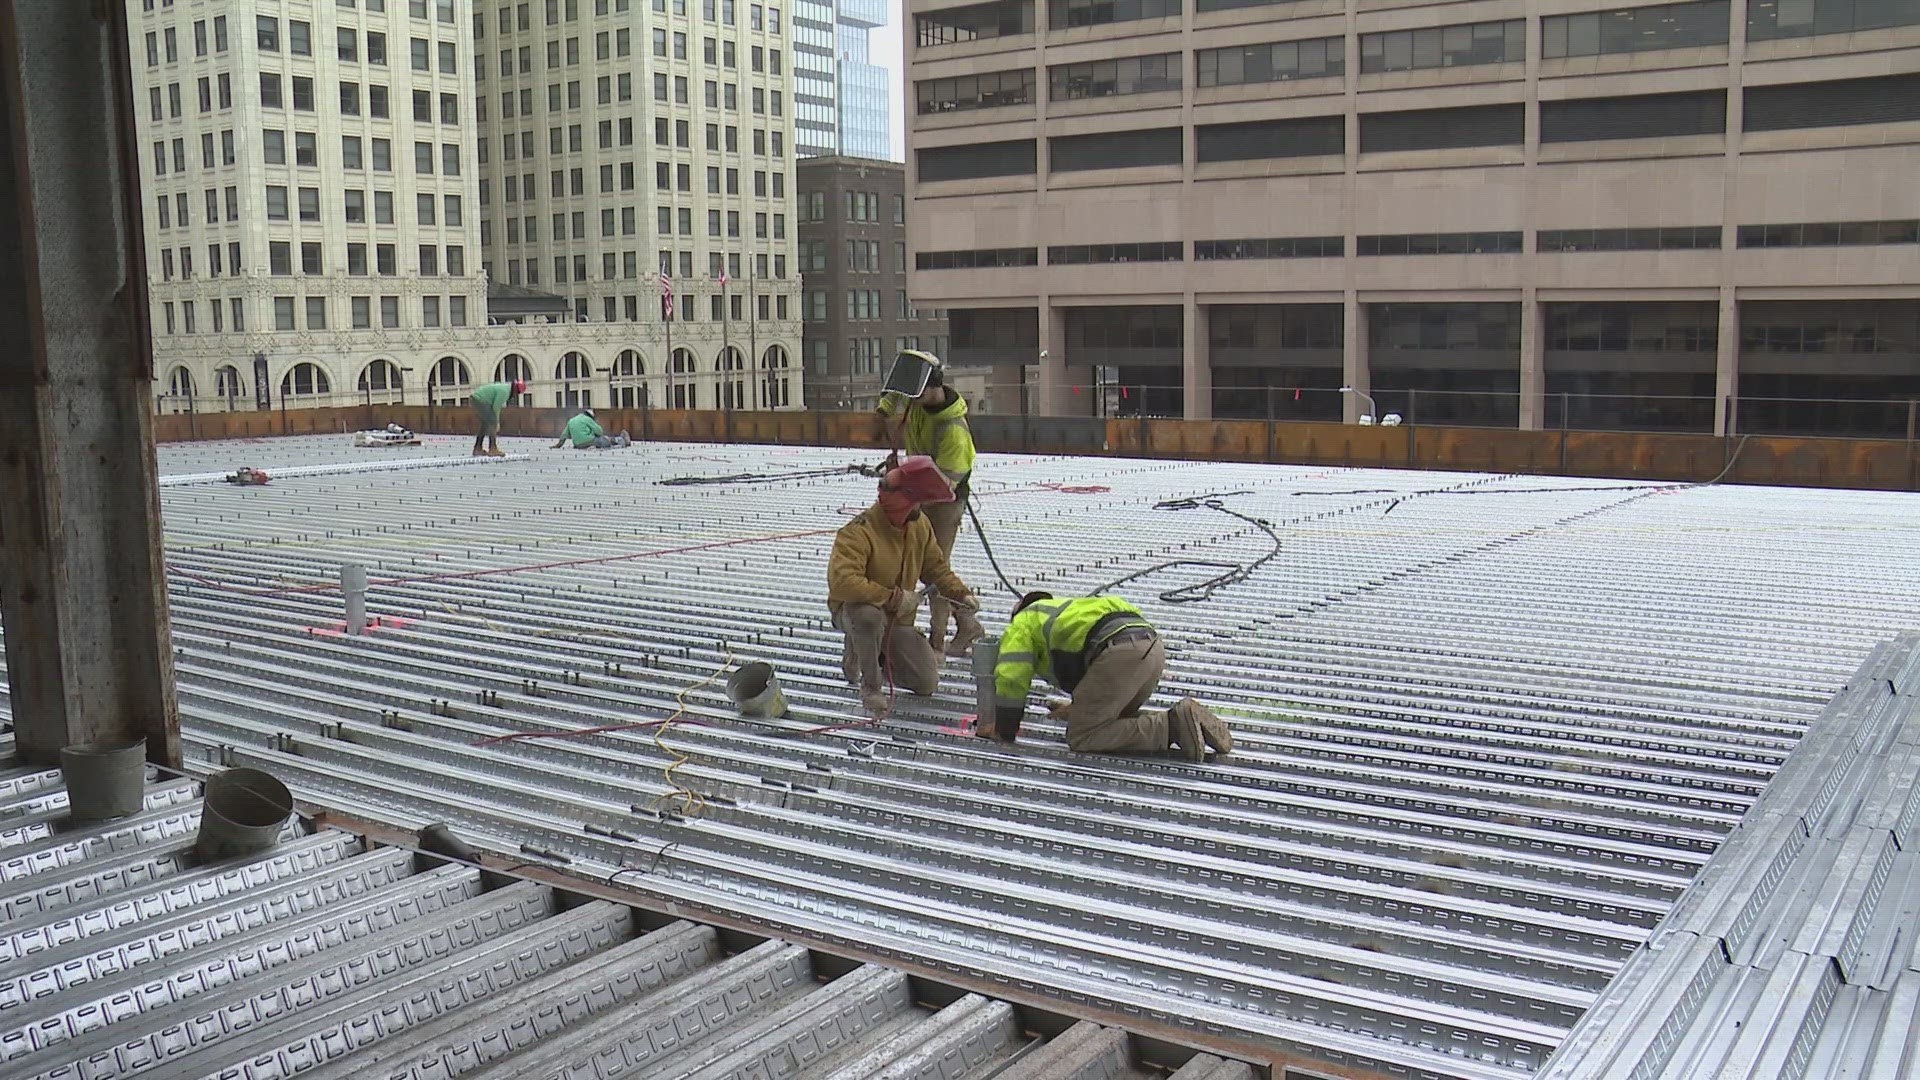 At the Huntington Convention Center of Cleveland, that preparation involves construction on a $49 million renovation project.